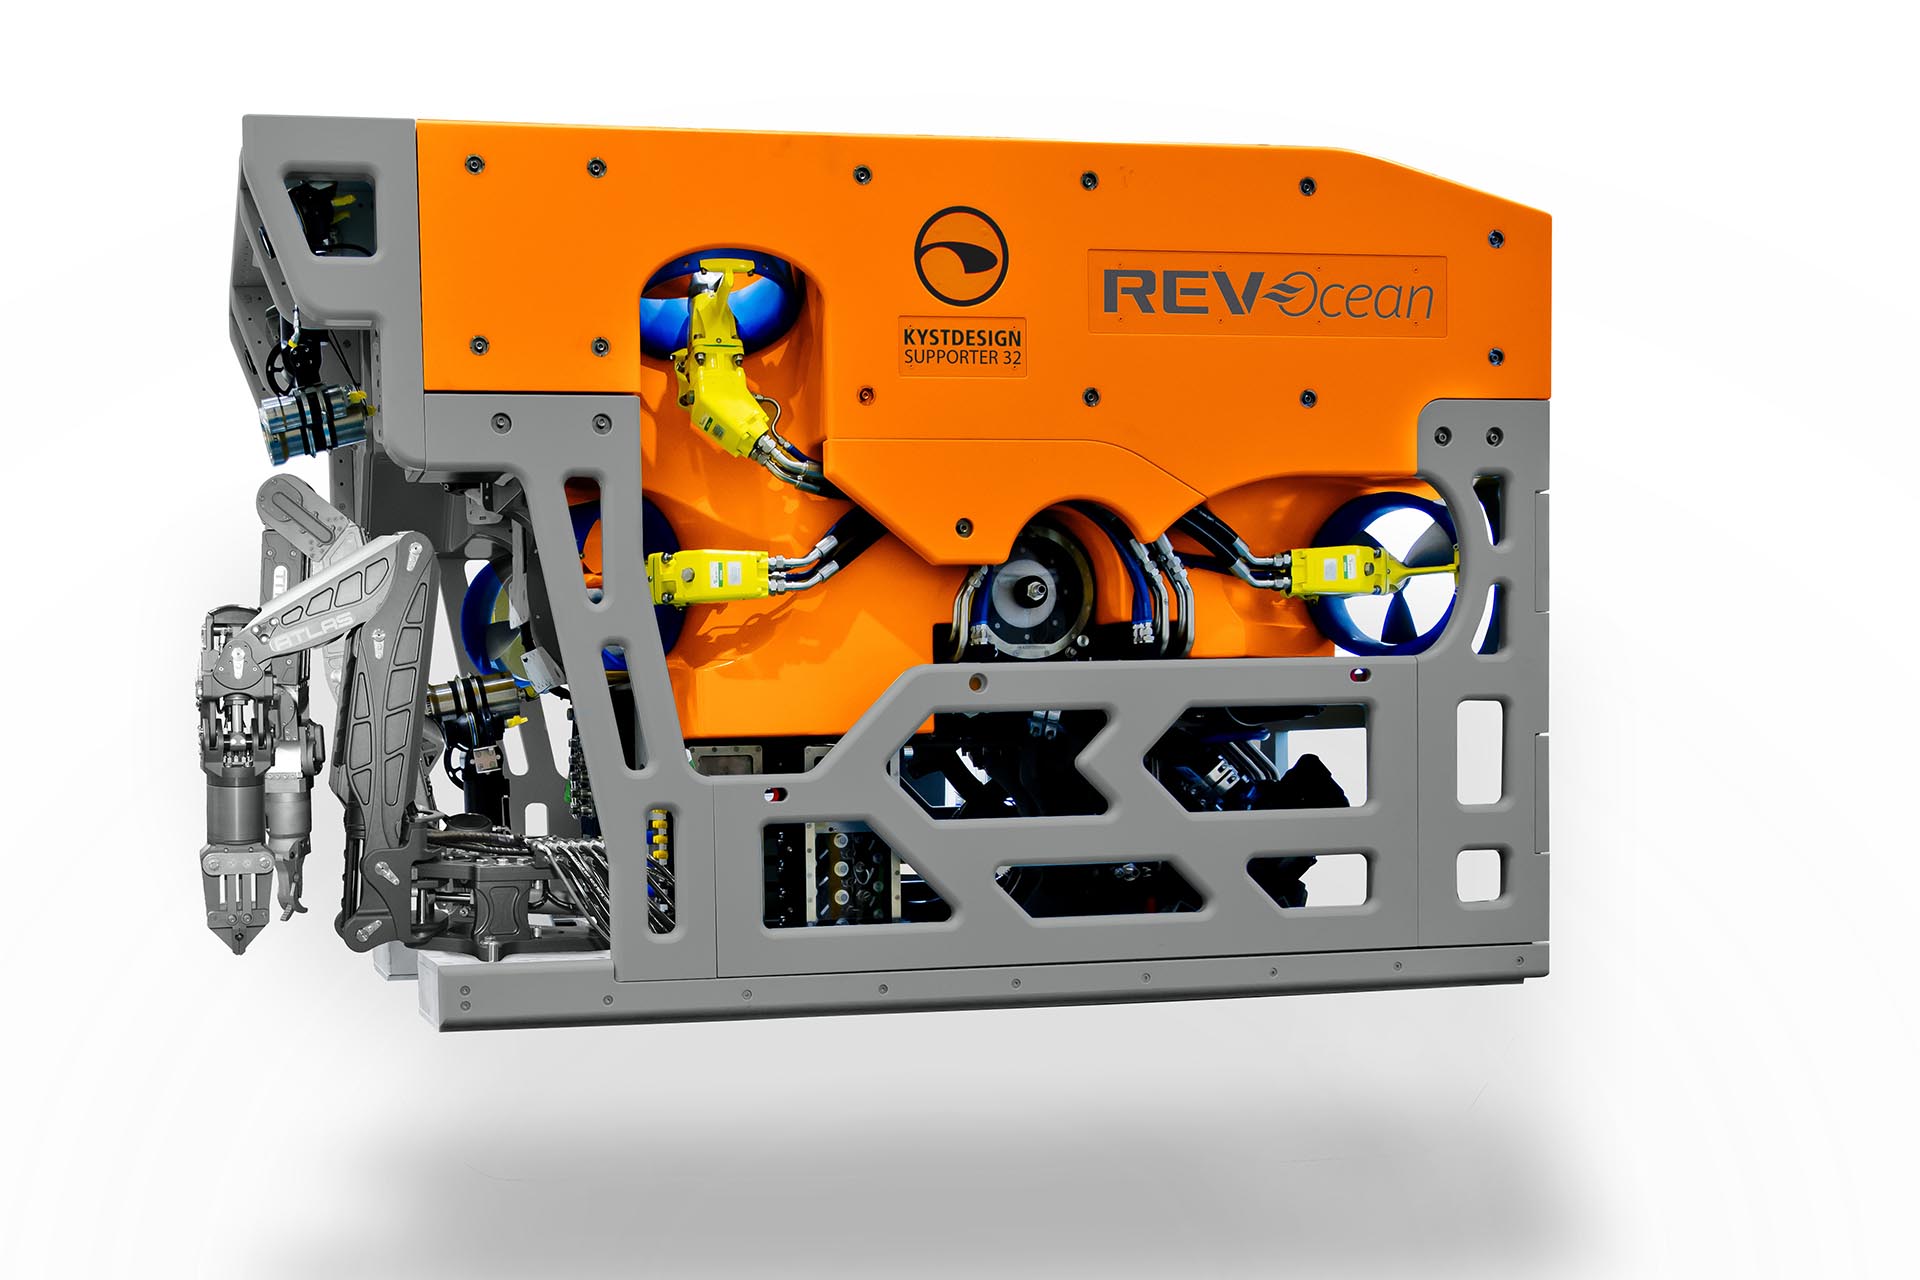 REV Ocean to explore and sample biodiversity down to 6000 meters – with submersible ROV from Kystdesign 